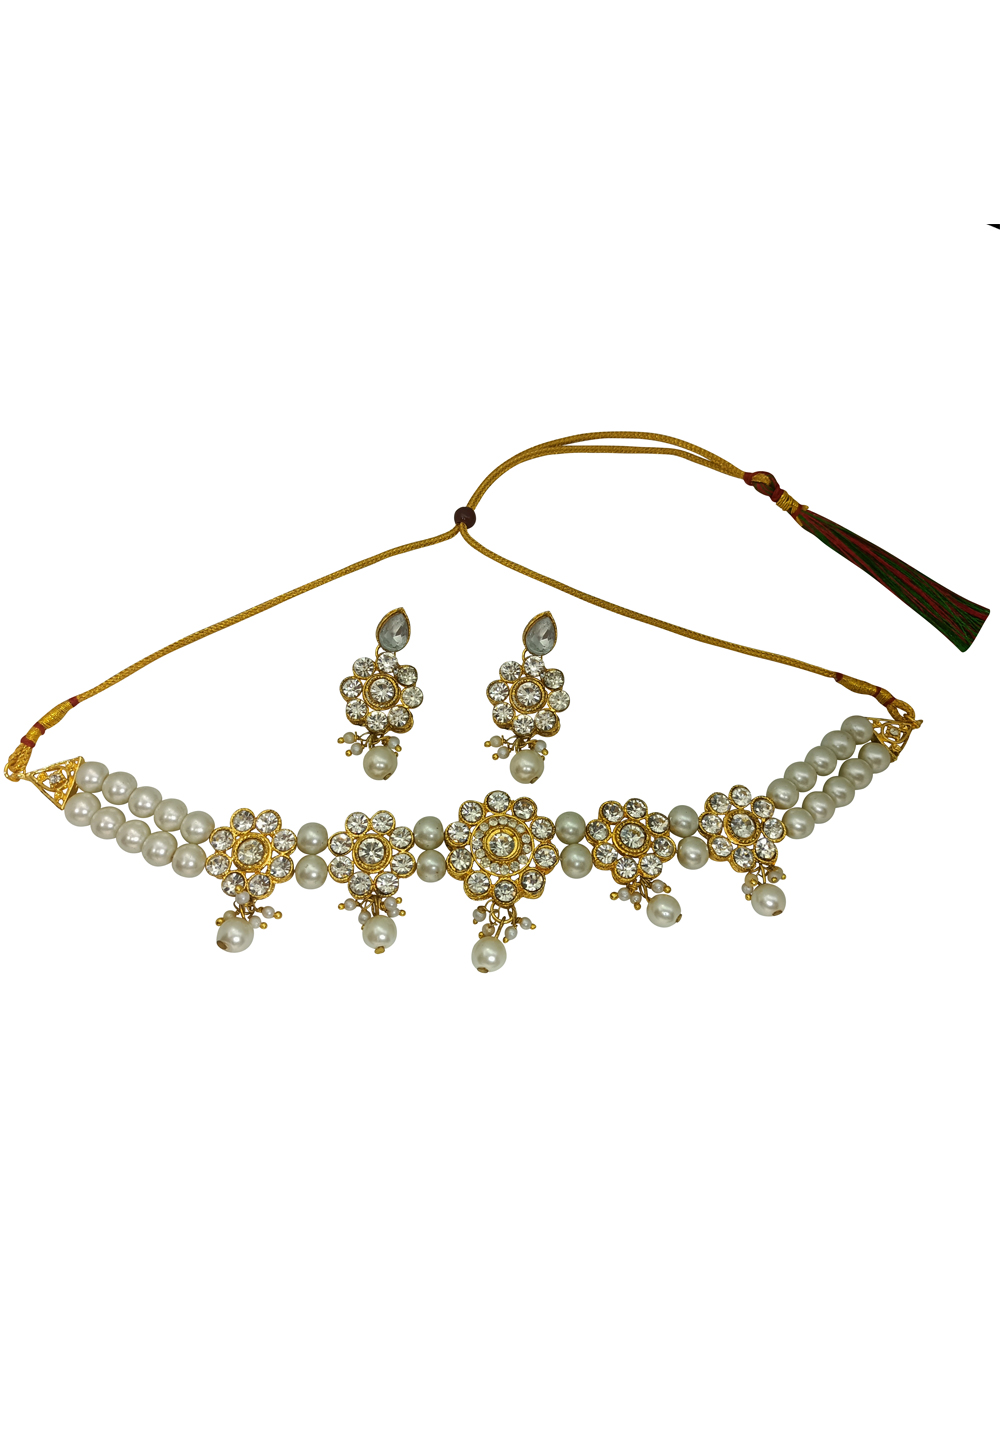 Off White Alloy Austrian Diamonds And Kundan Necklace Set With Earrings 269232